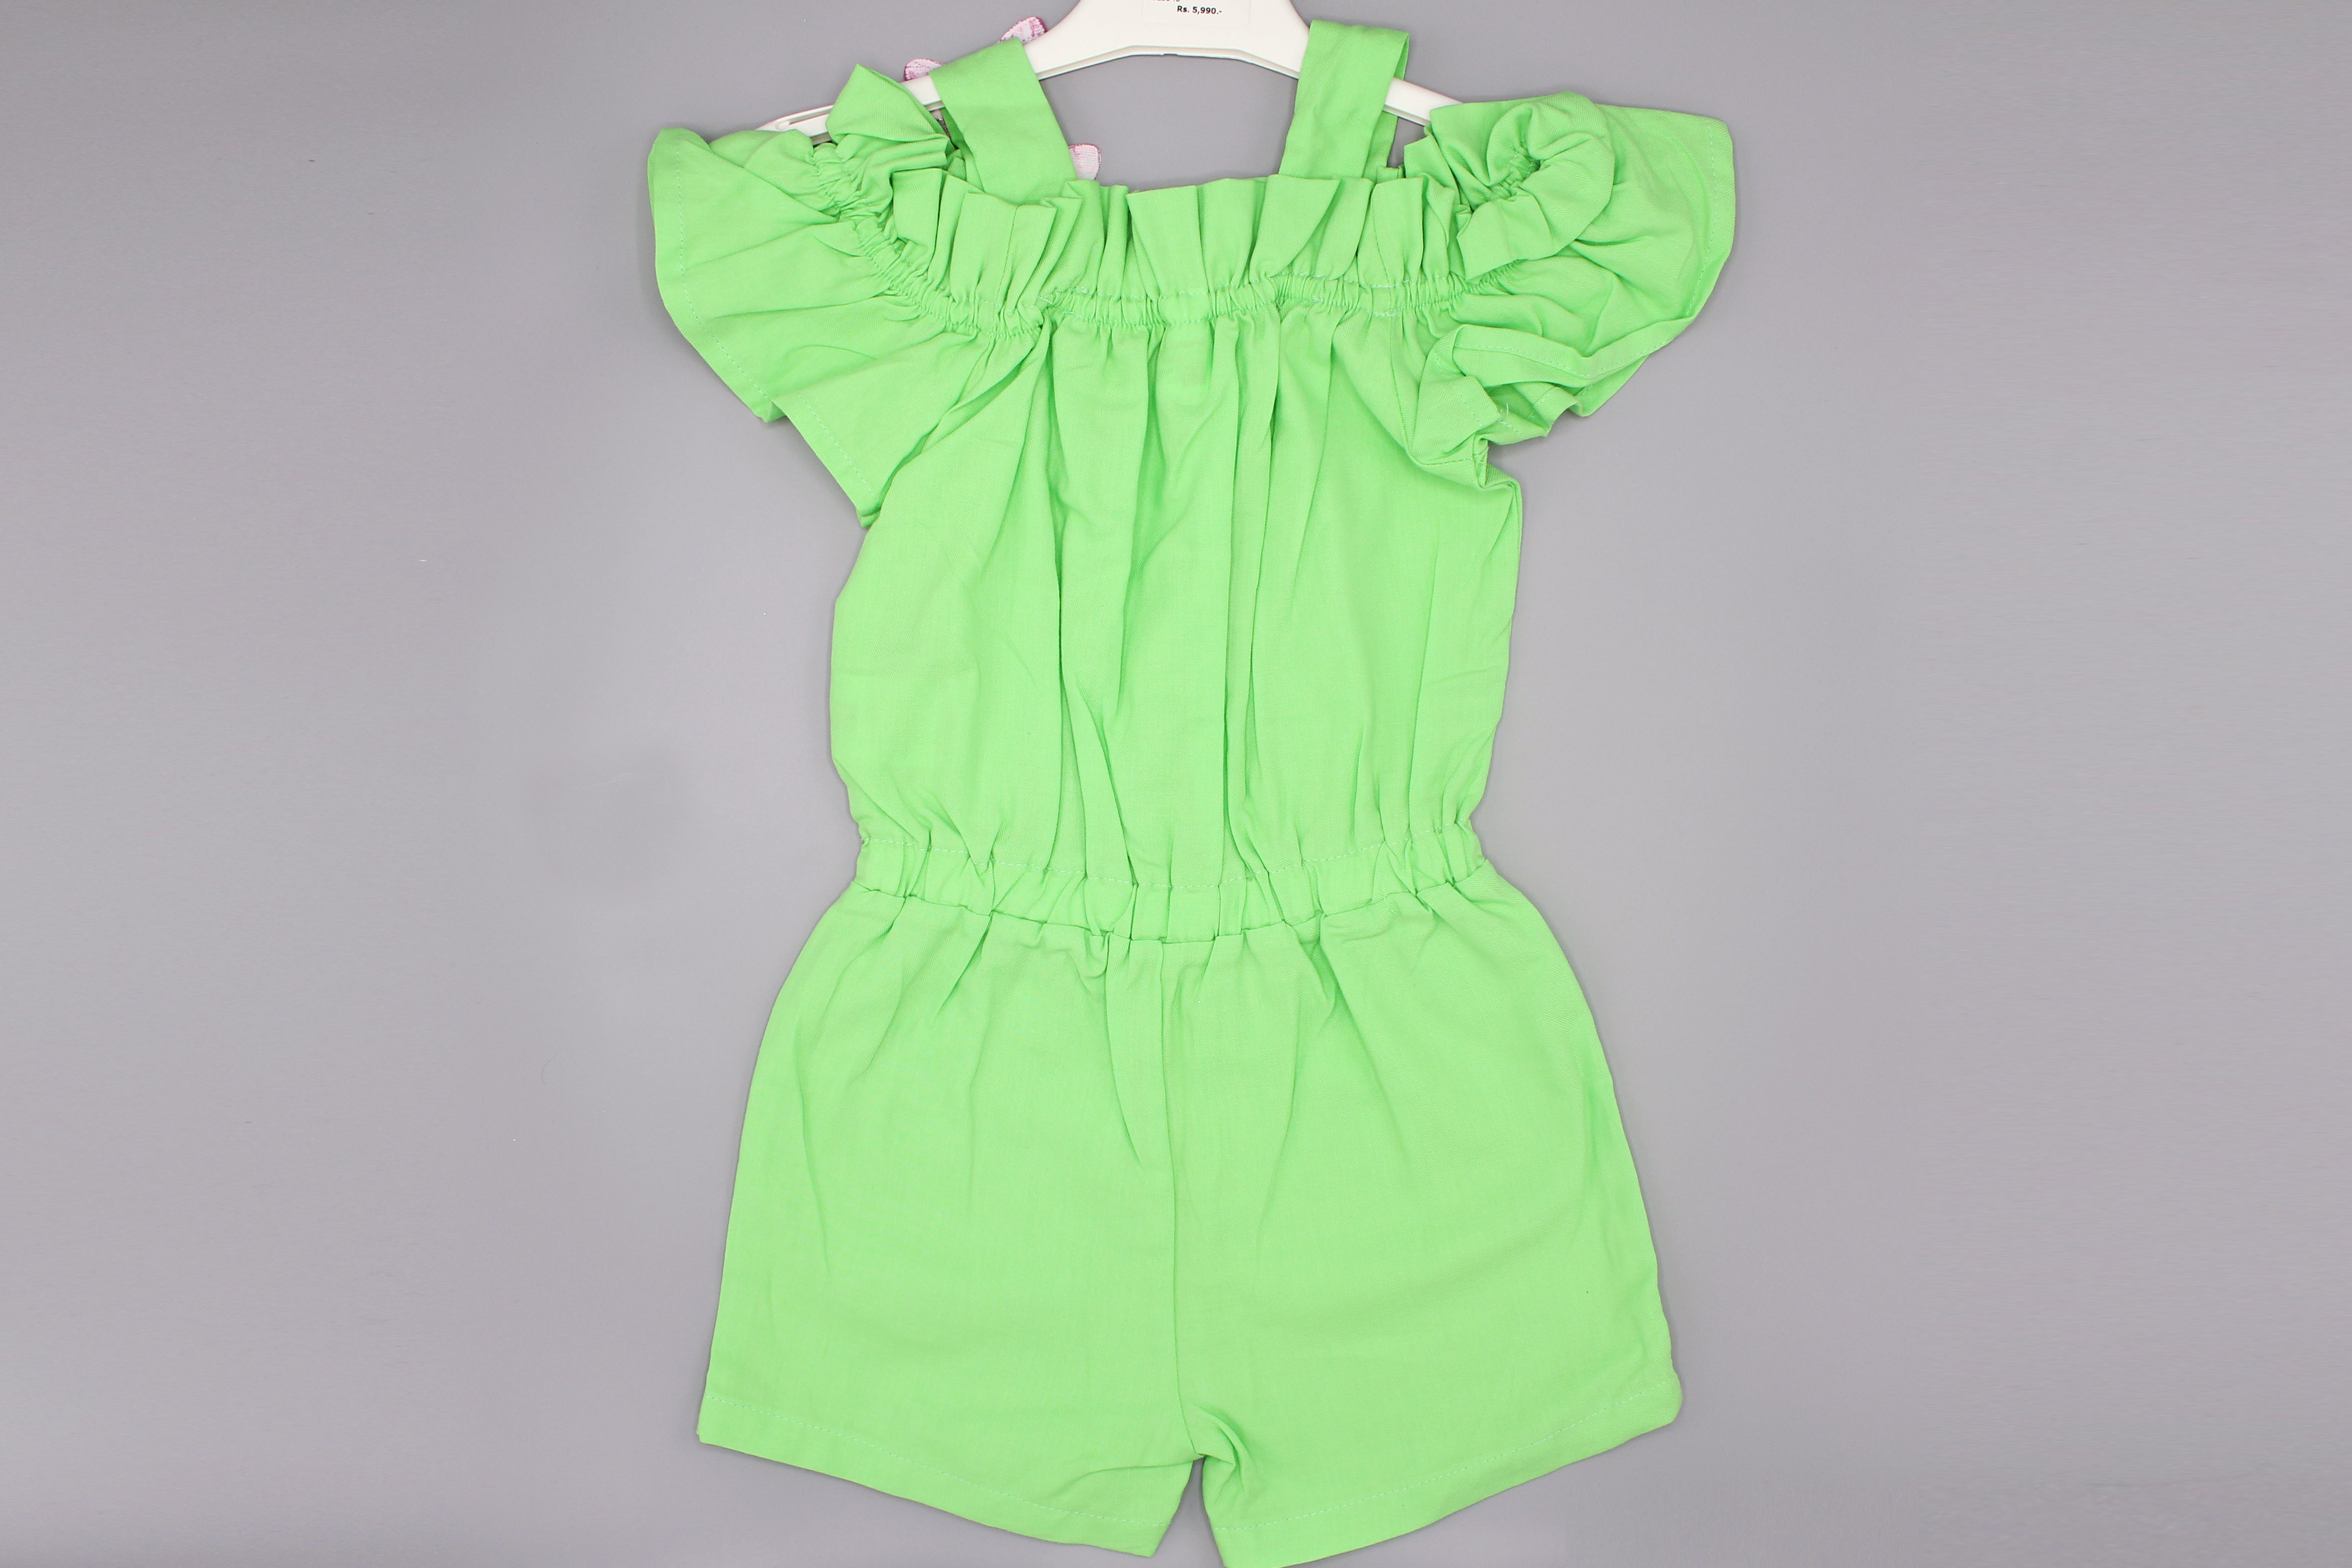 GIRL JUMP SUIT - 29155